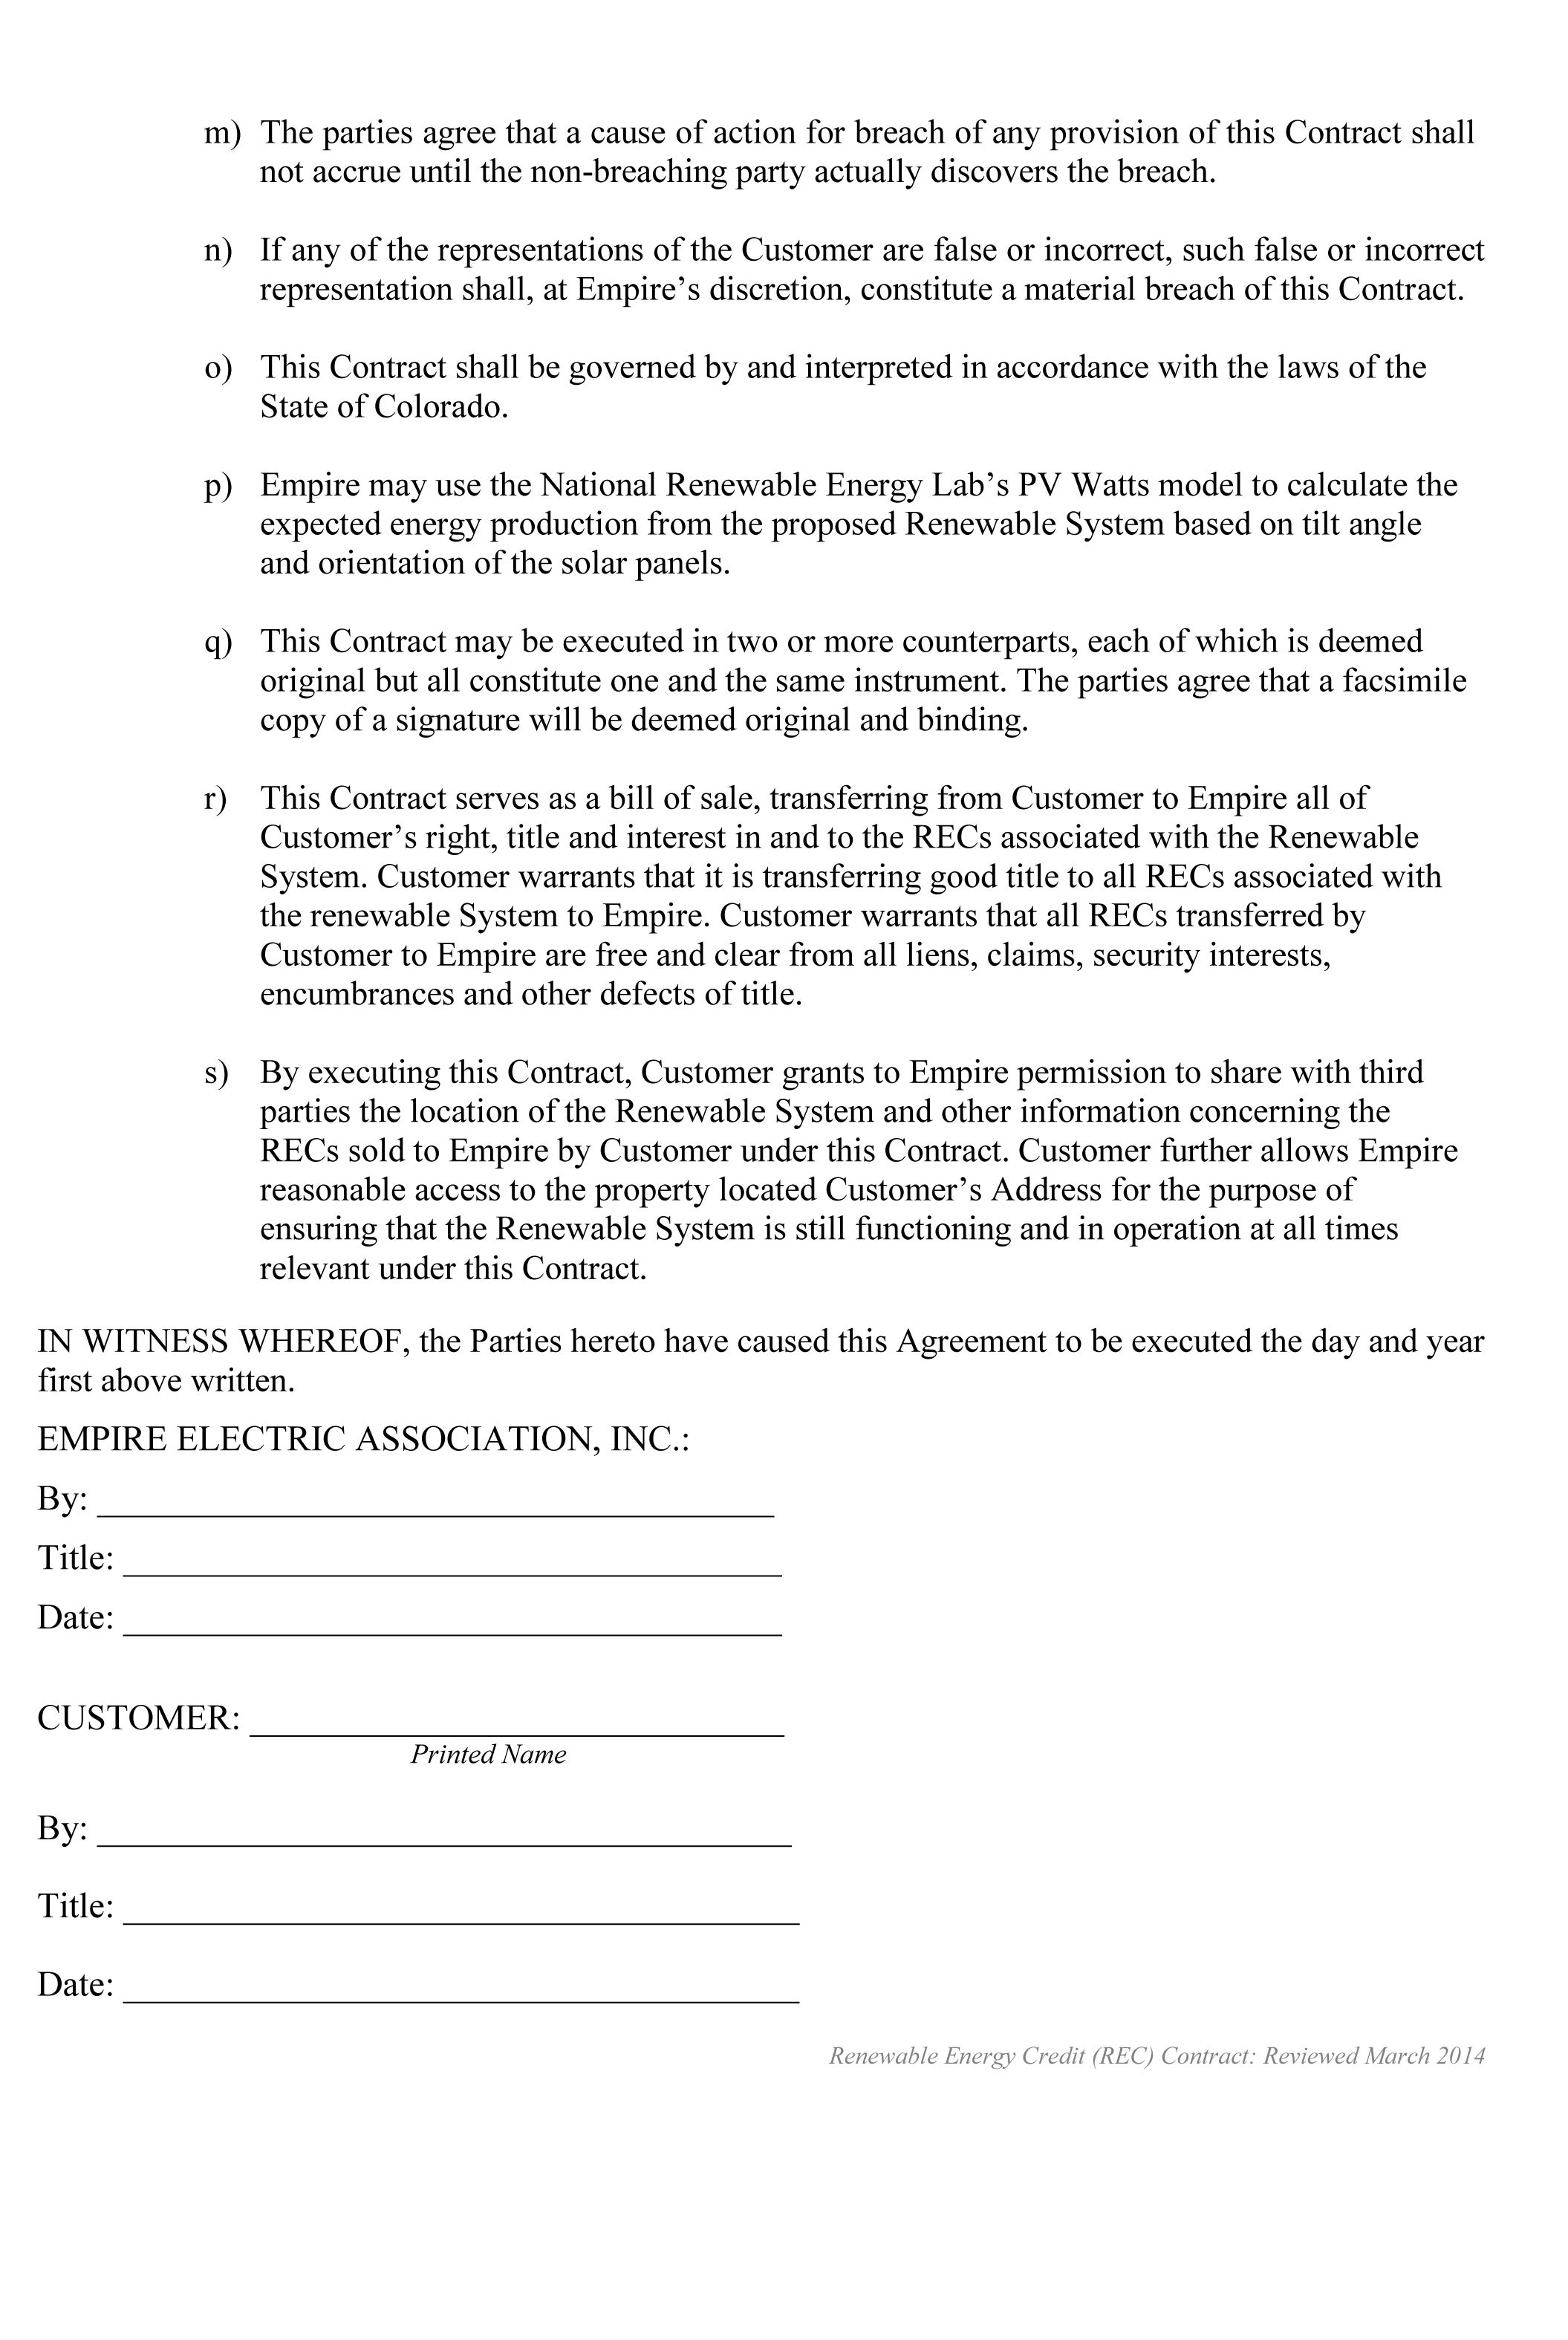 REC Contract Page 3